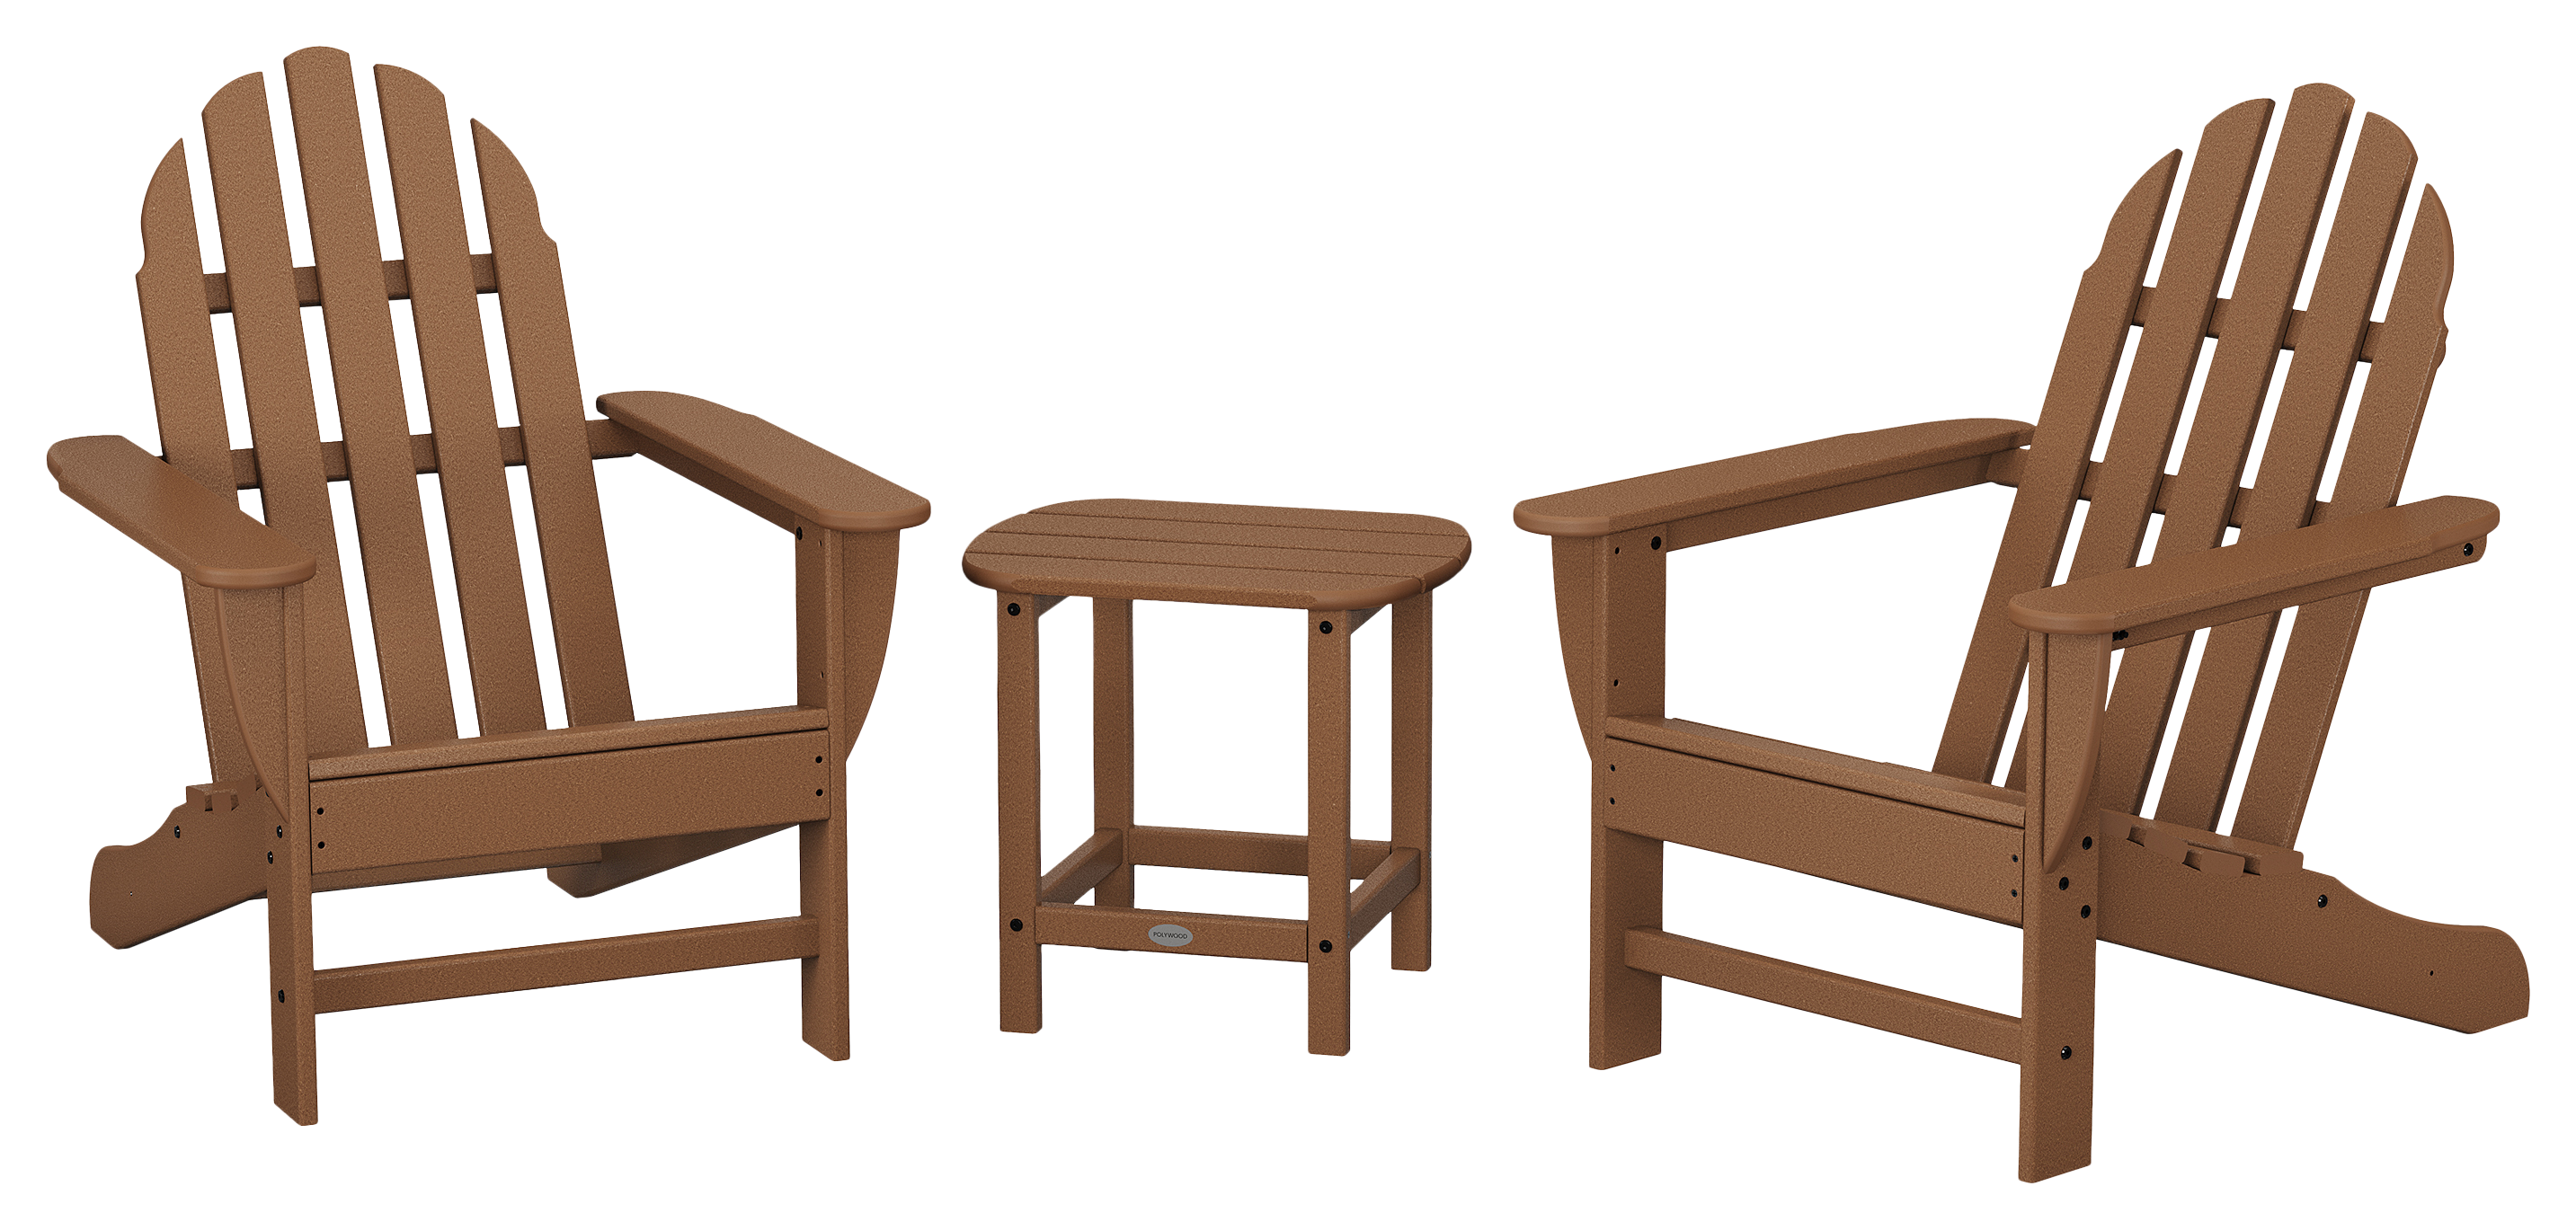 POLYWOOD Classic Adirondack 3-Piece Set with South Beach Side Table - Teak